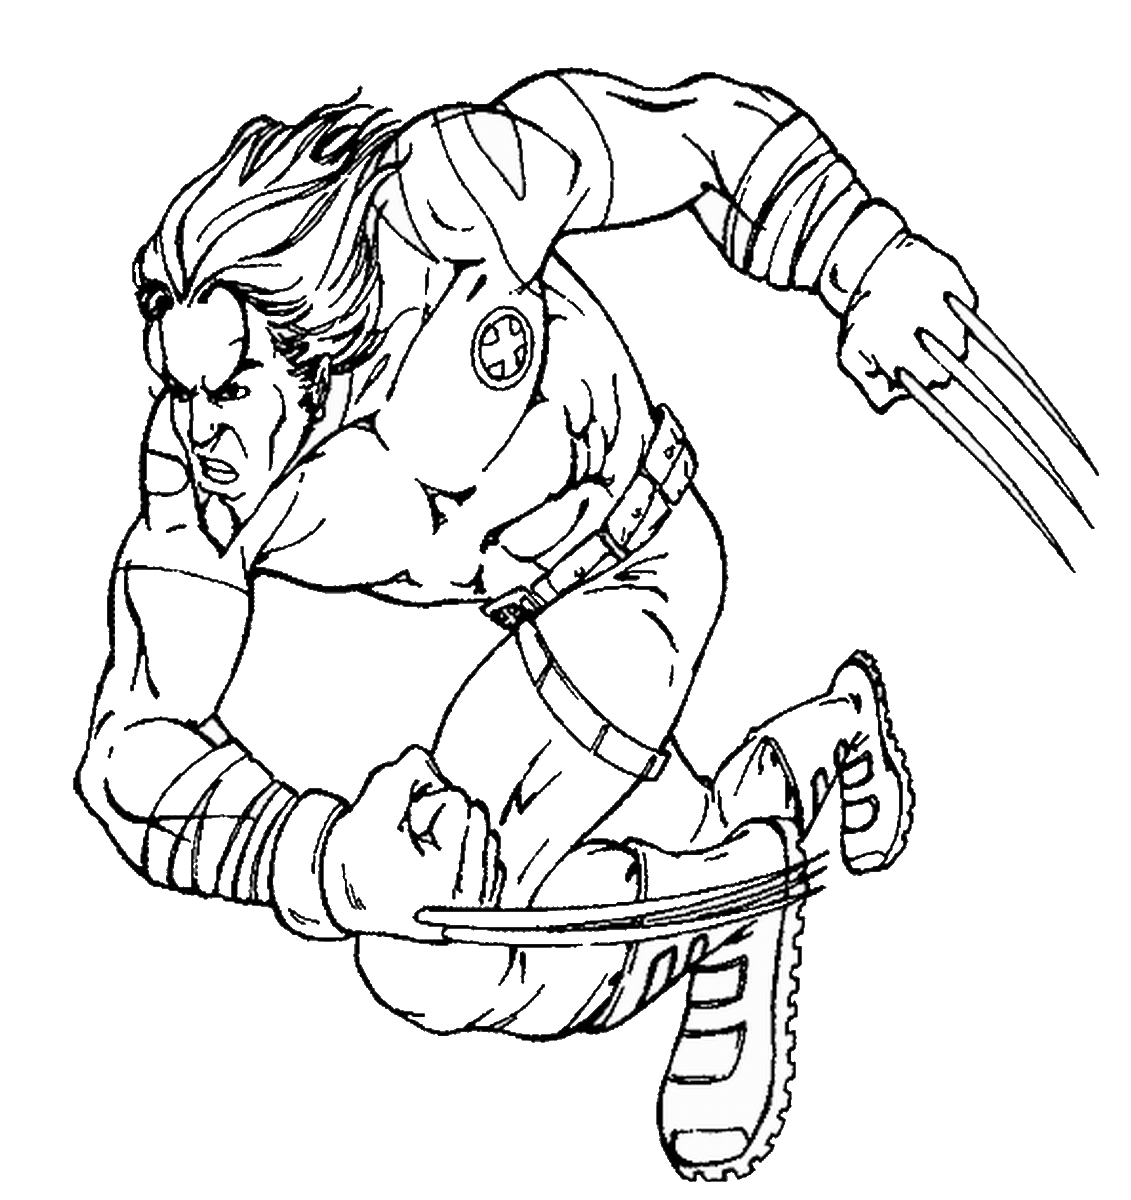 Download Wolverine and the X-Men Coloring Pages